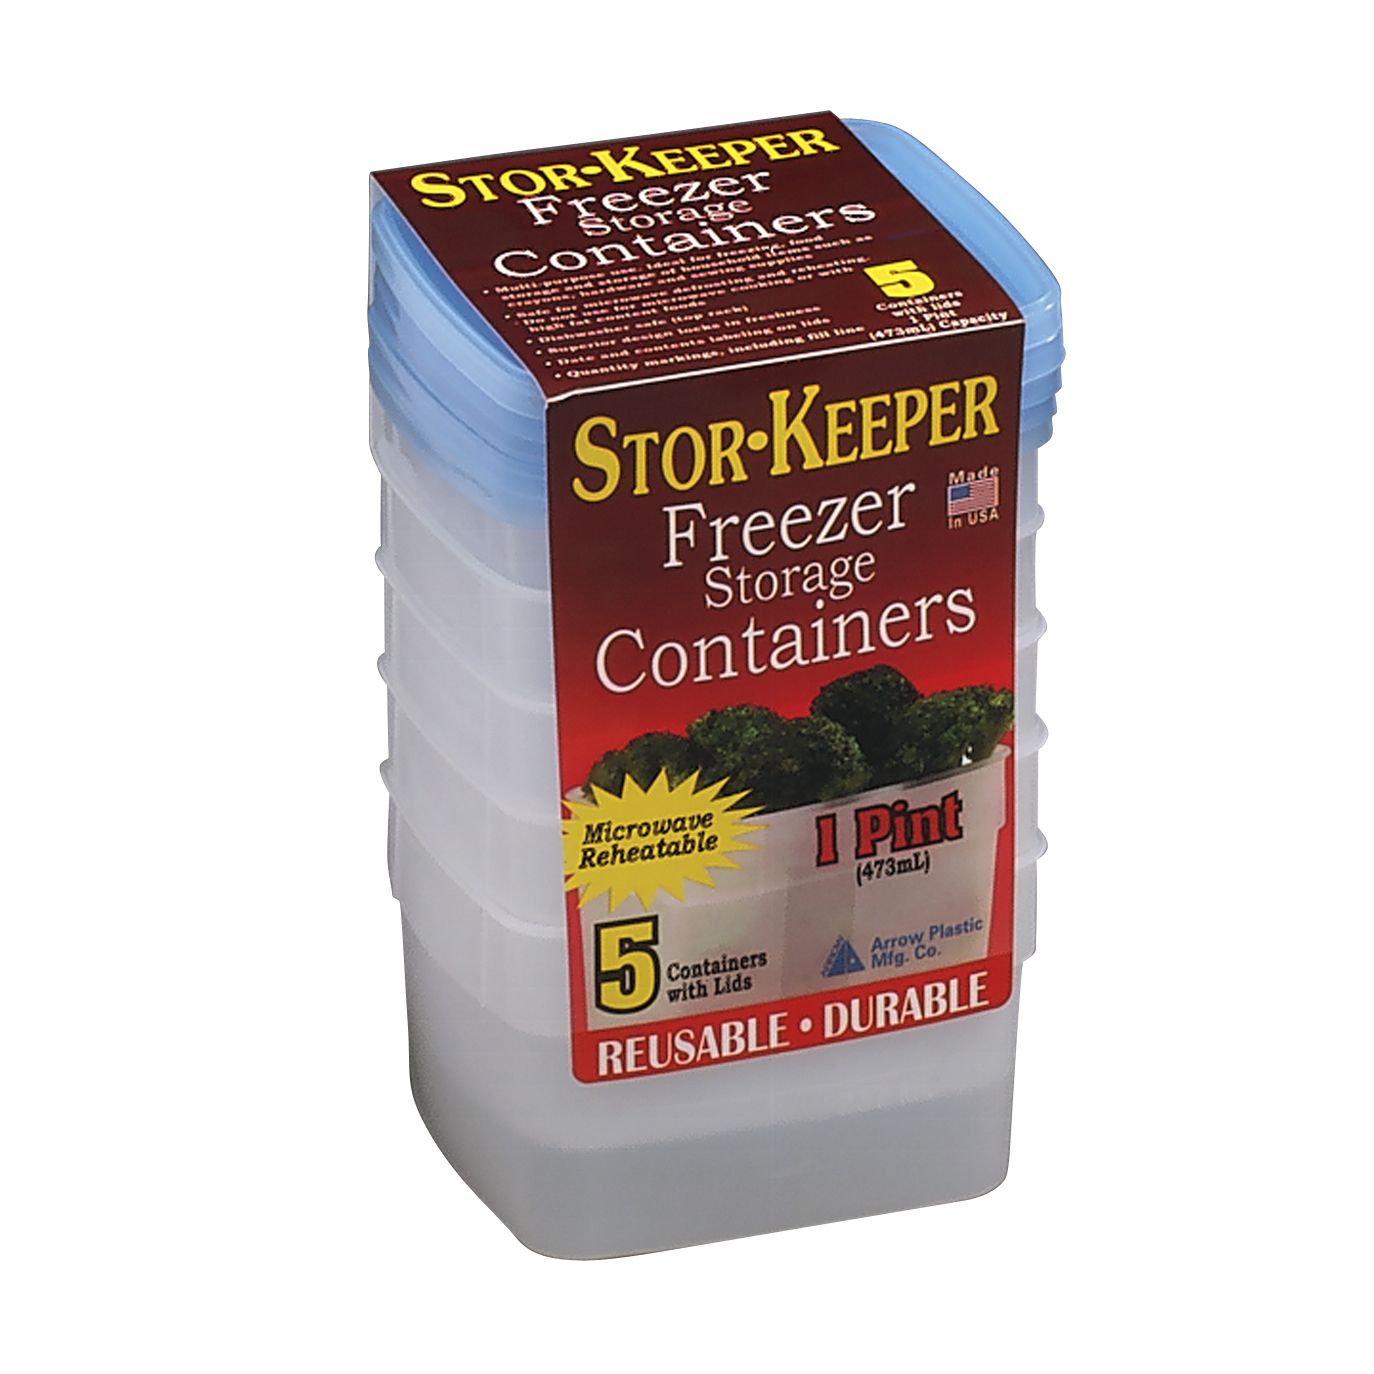 1 Pint Freezer Storage Container - 5 pack